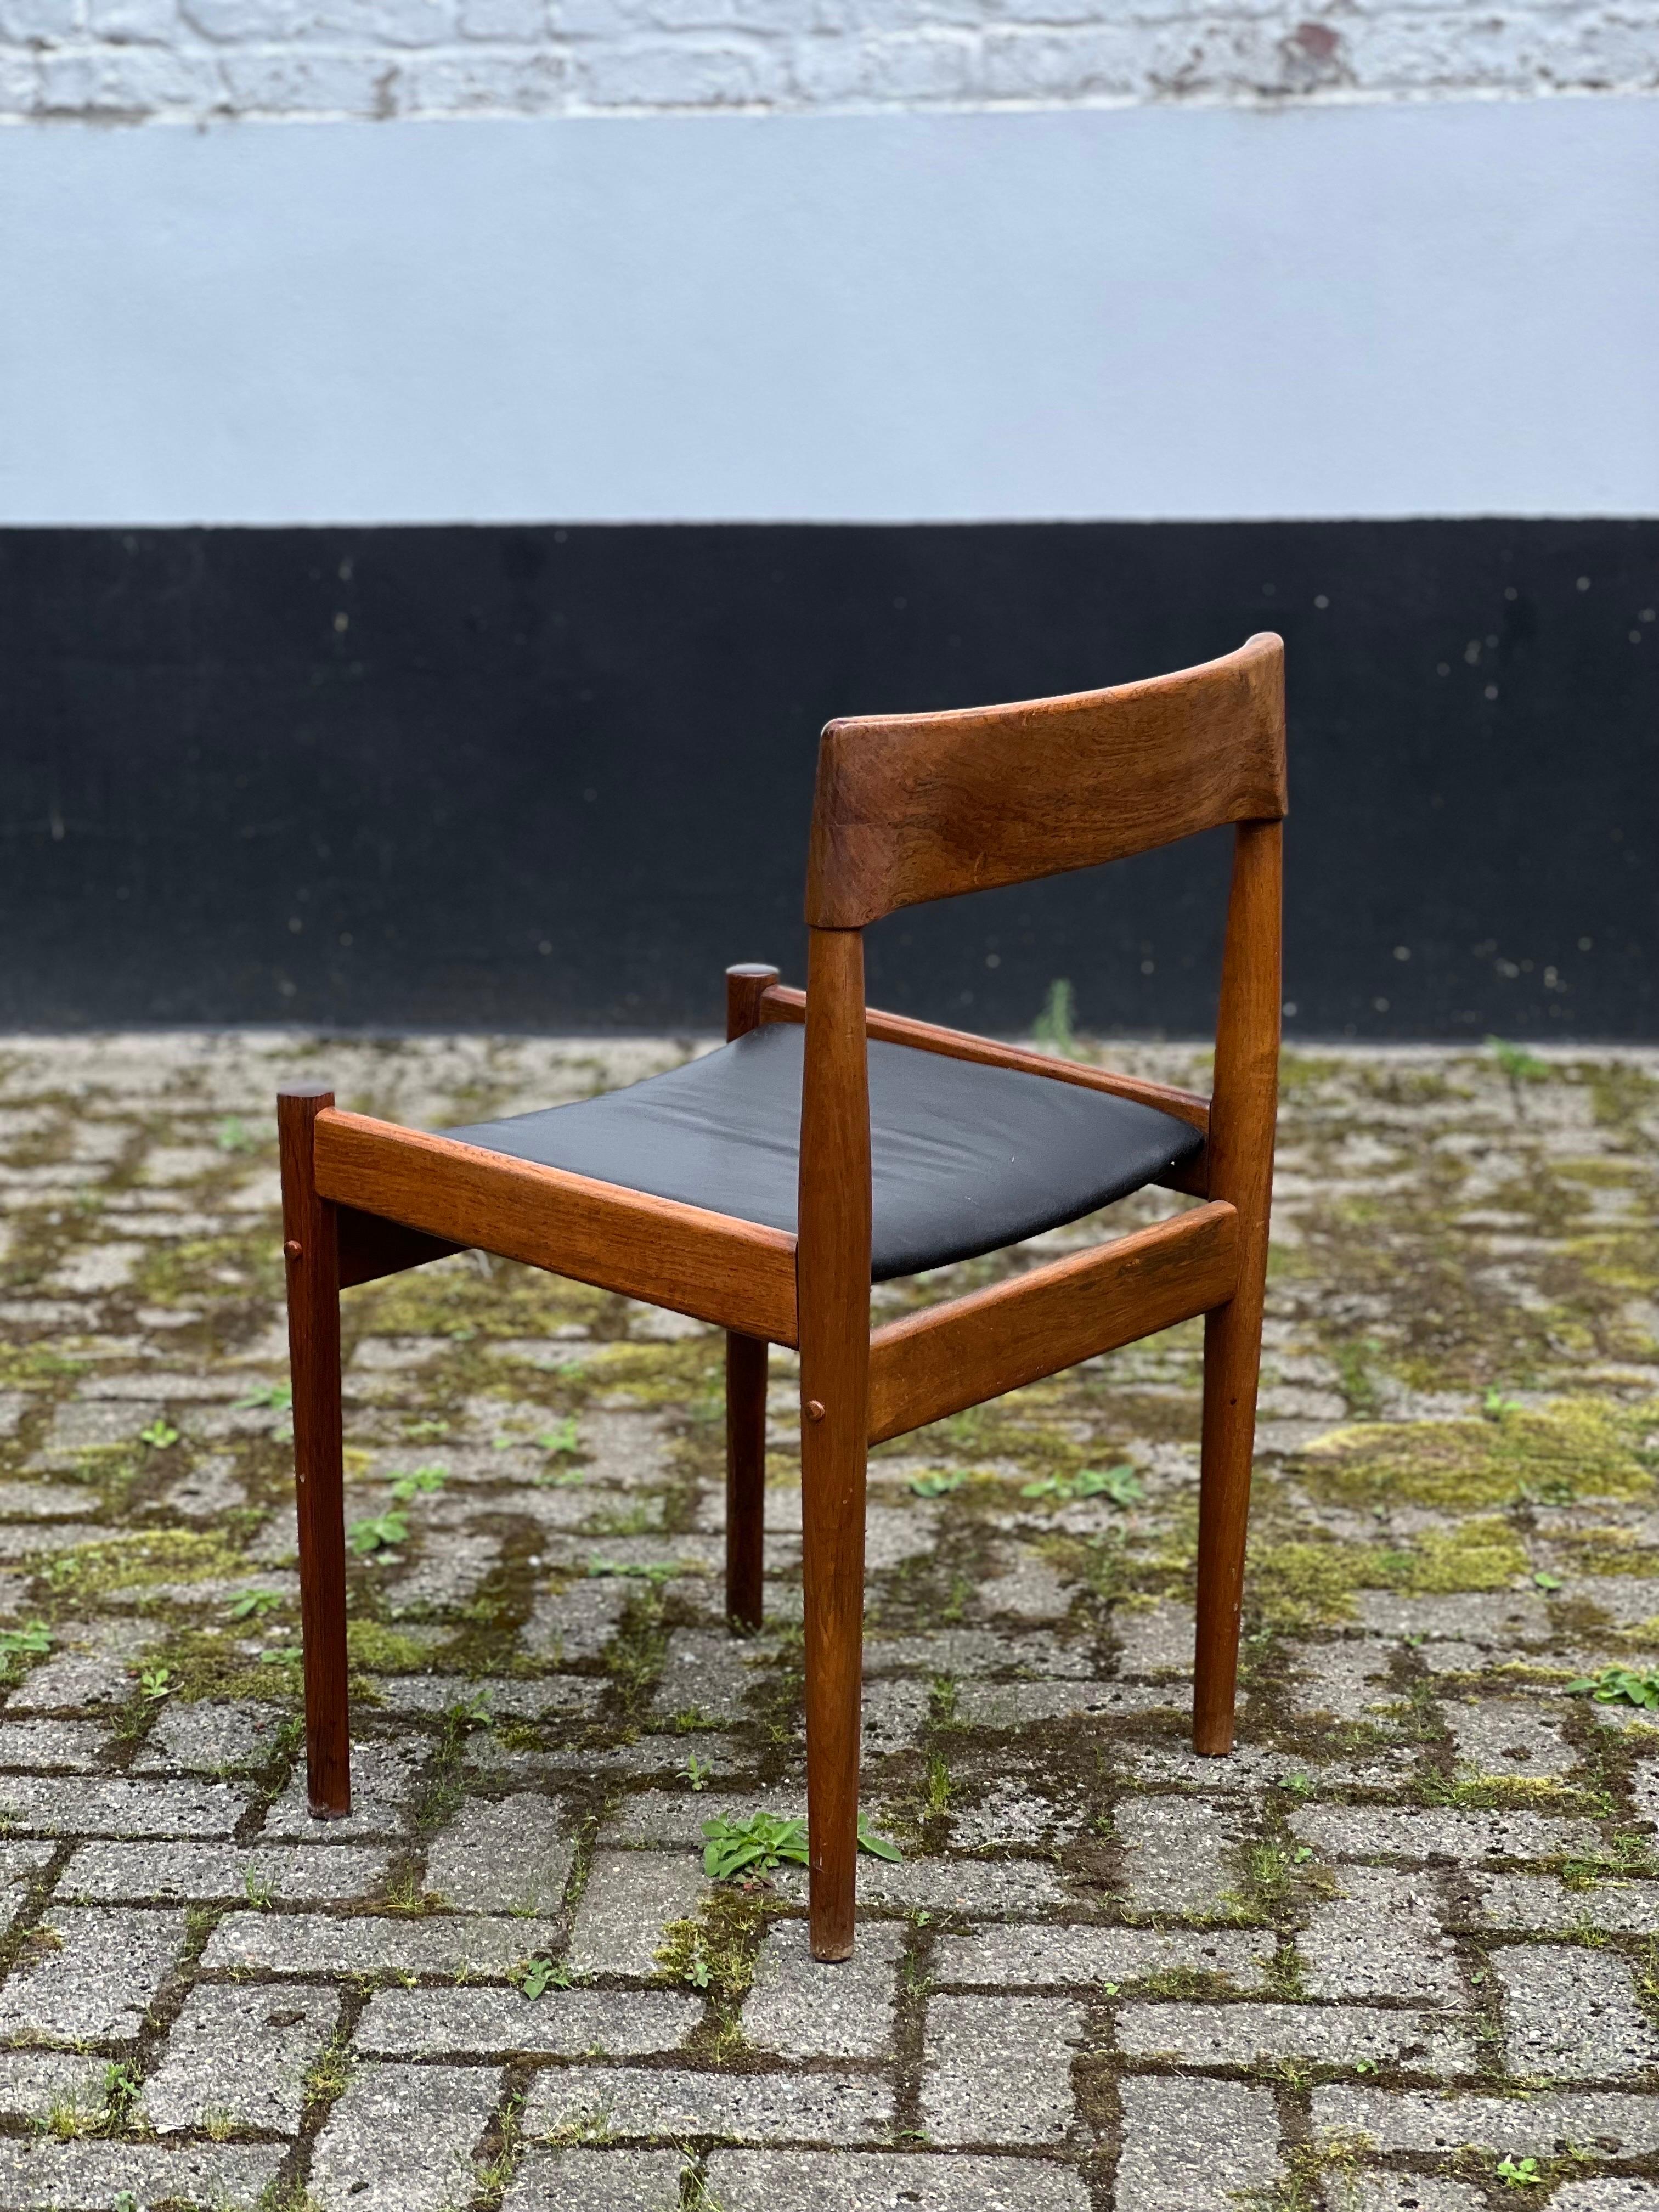 Elegant massive rosewood and black leather chairs by female designer Grete Jalk. Produced in the 6à's by cabinetmaker Poul Jeppessens. We have 8 chairs available and a table. 4 more chairs with leather on the backrest so 12 chairs in total. Please